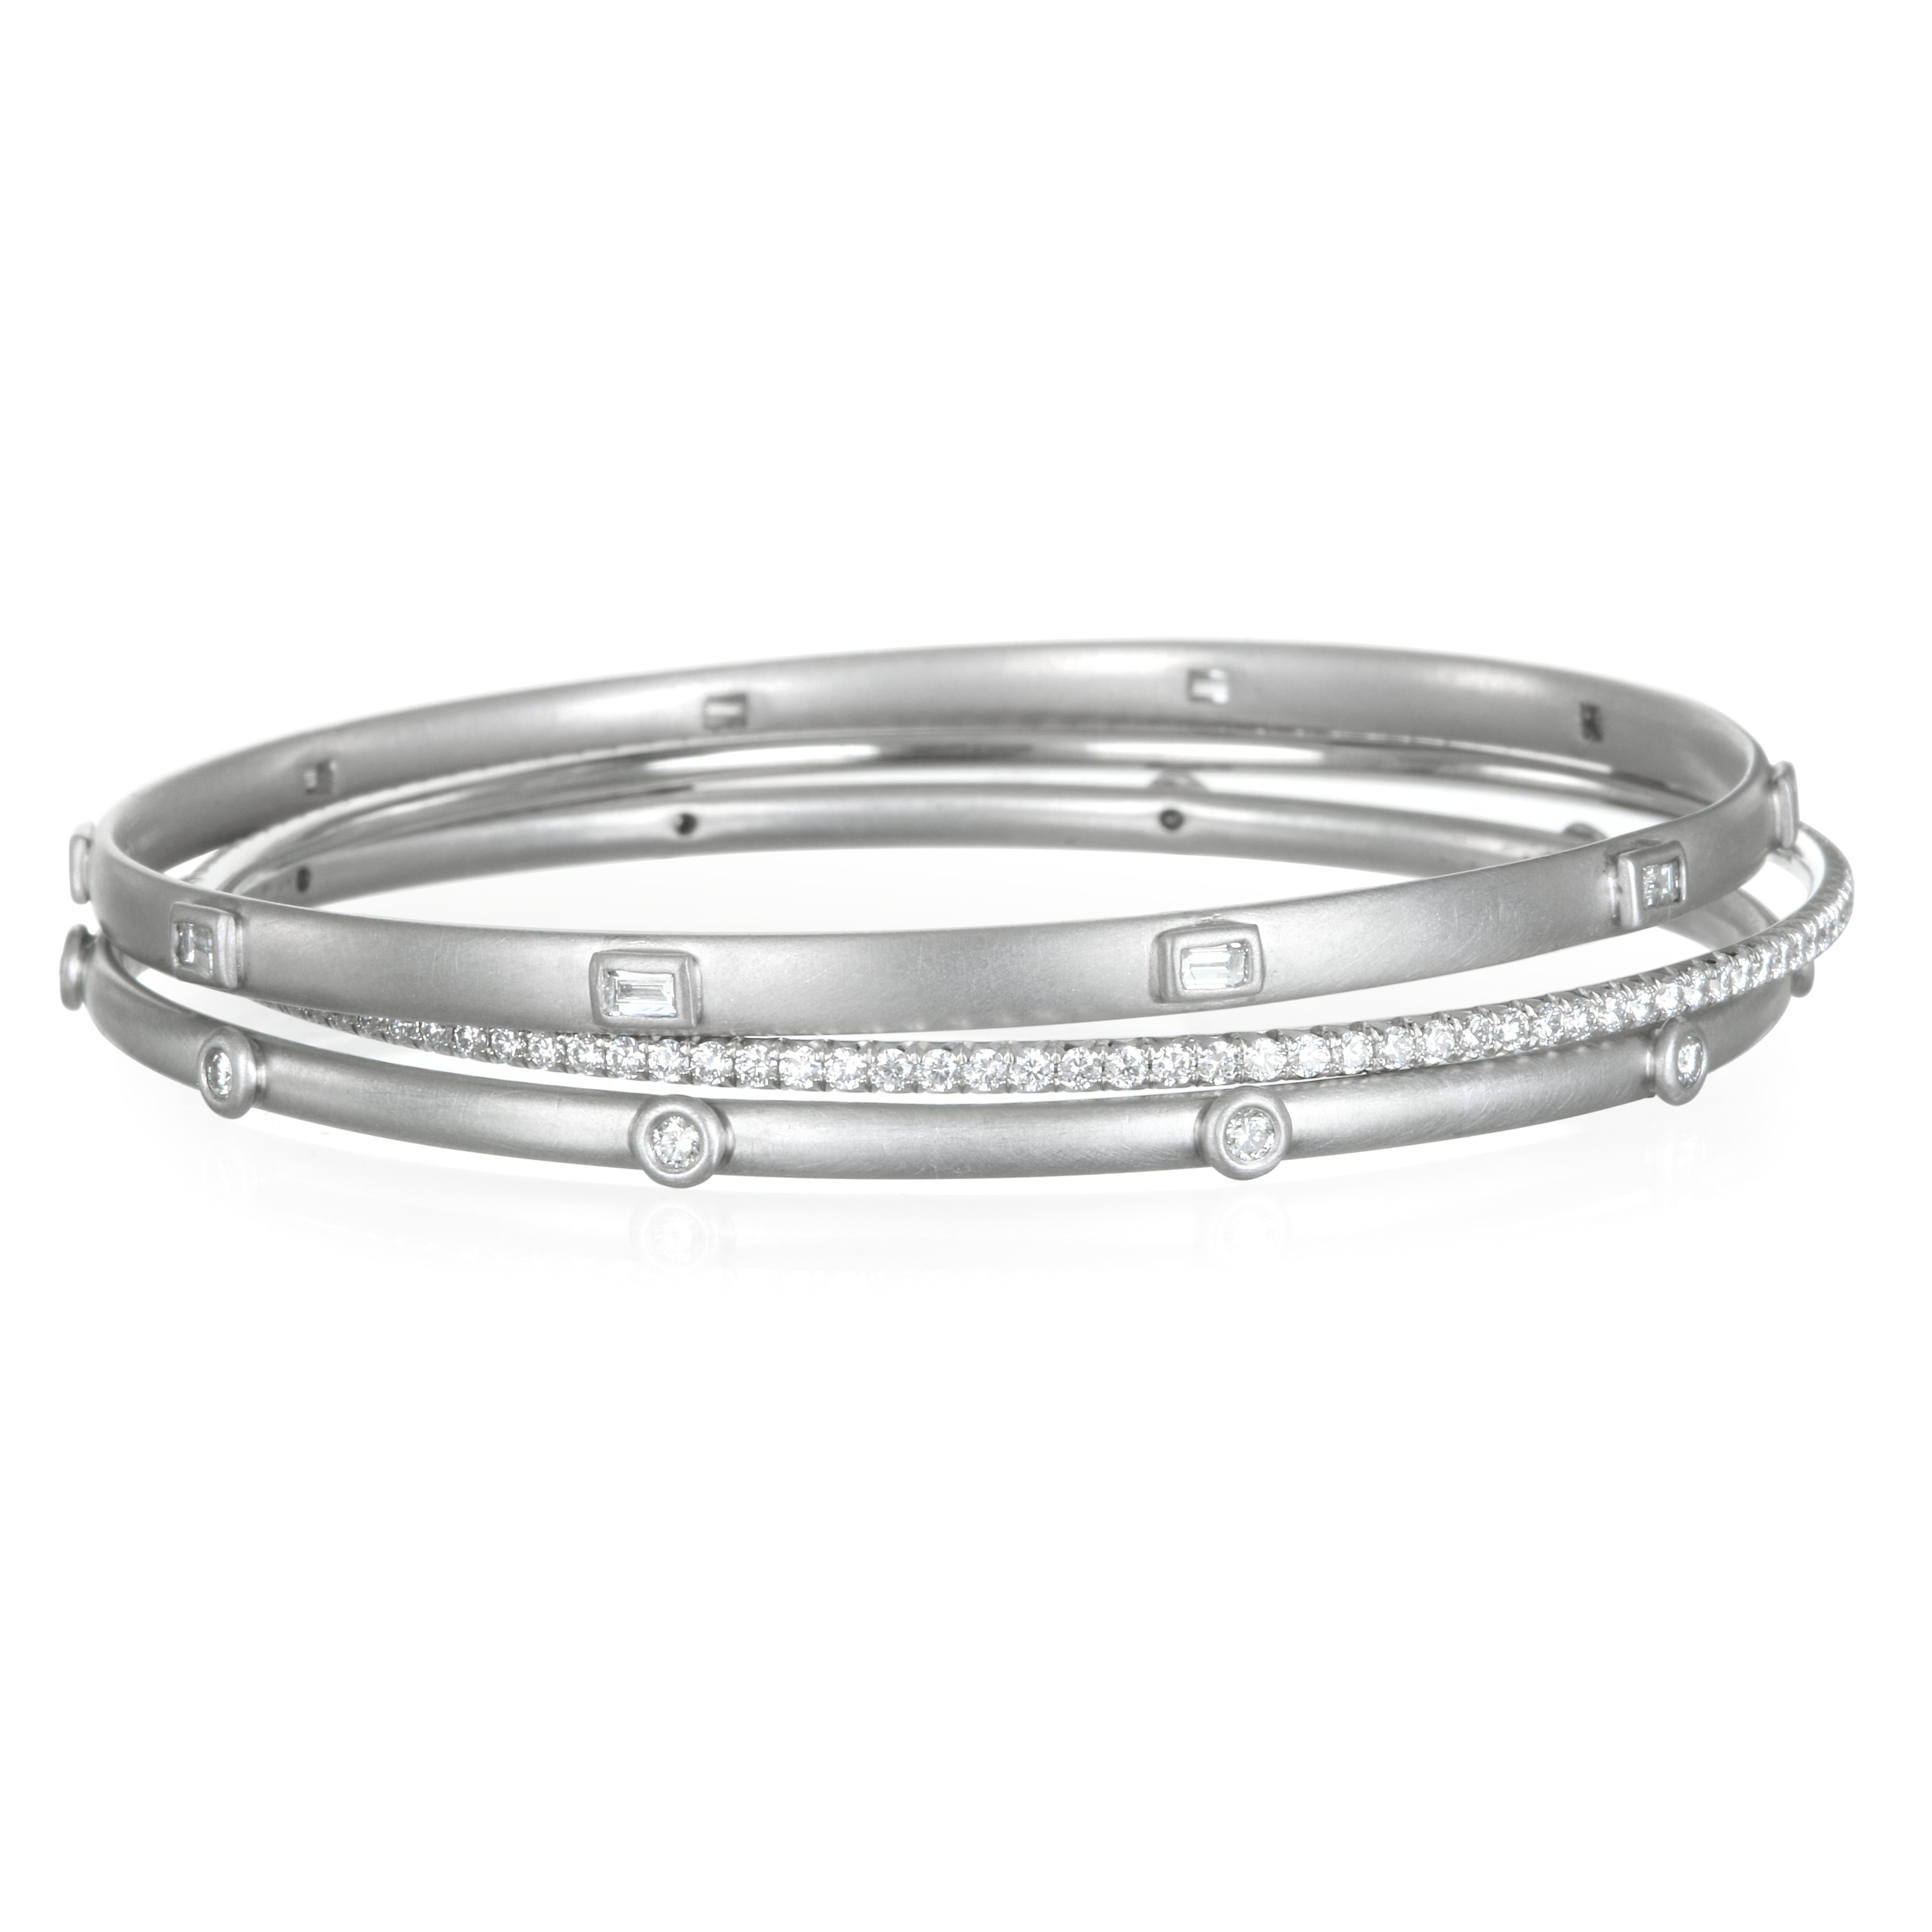 Faye Kim's handcrafted diamond baguette bangle in platinum is modern-casual with a sophisticated flair. The matte finish contrasts beautifully with the sparkle of diamonds. 
Perfect on its own or stack with other bangles for your own unique